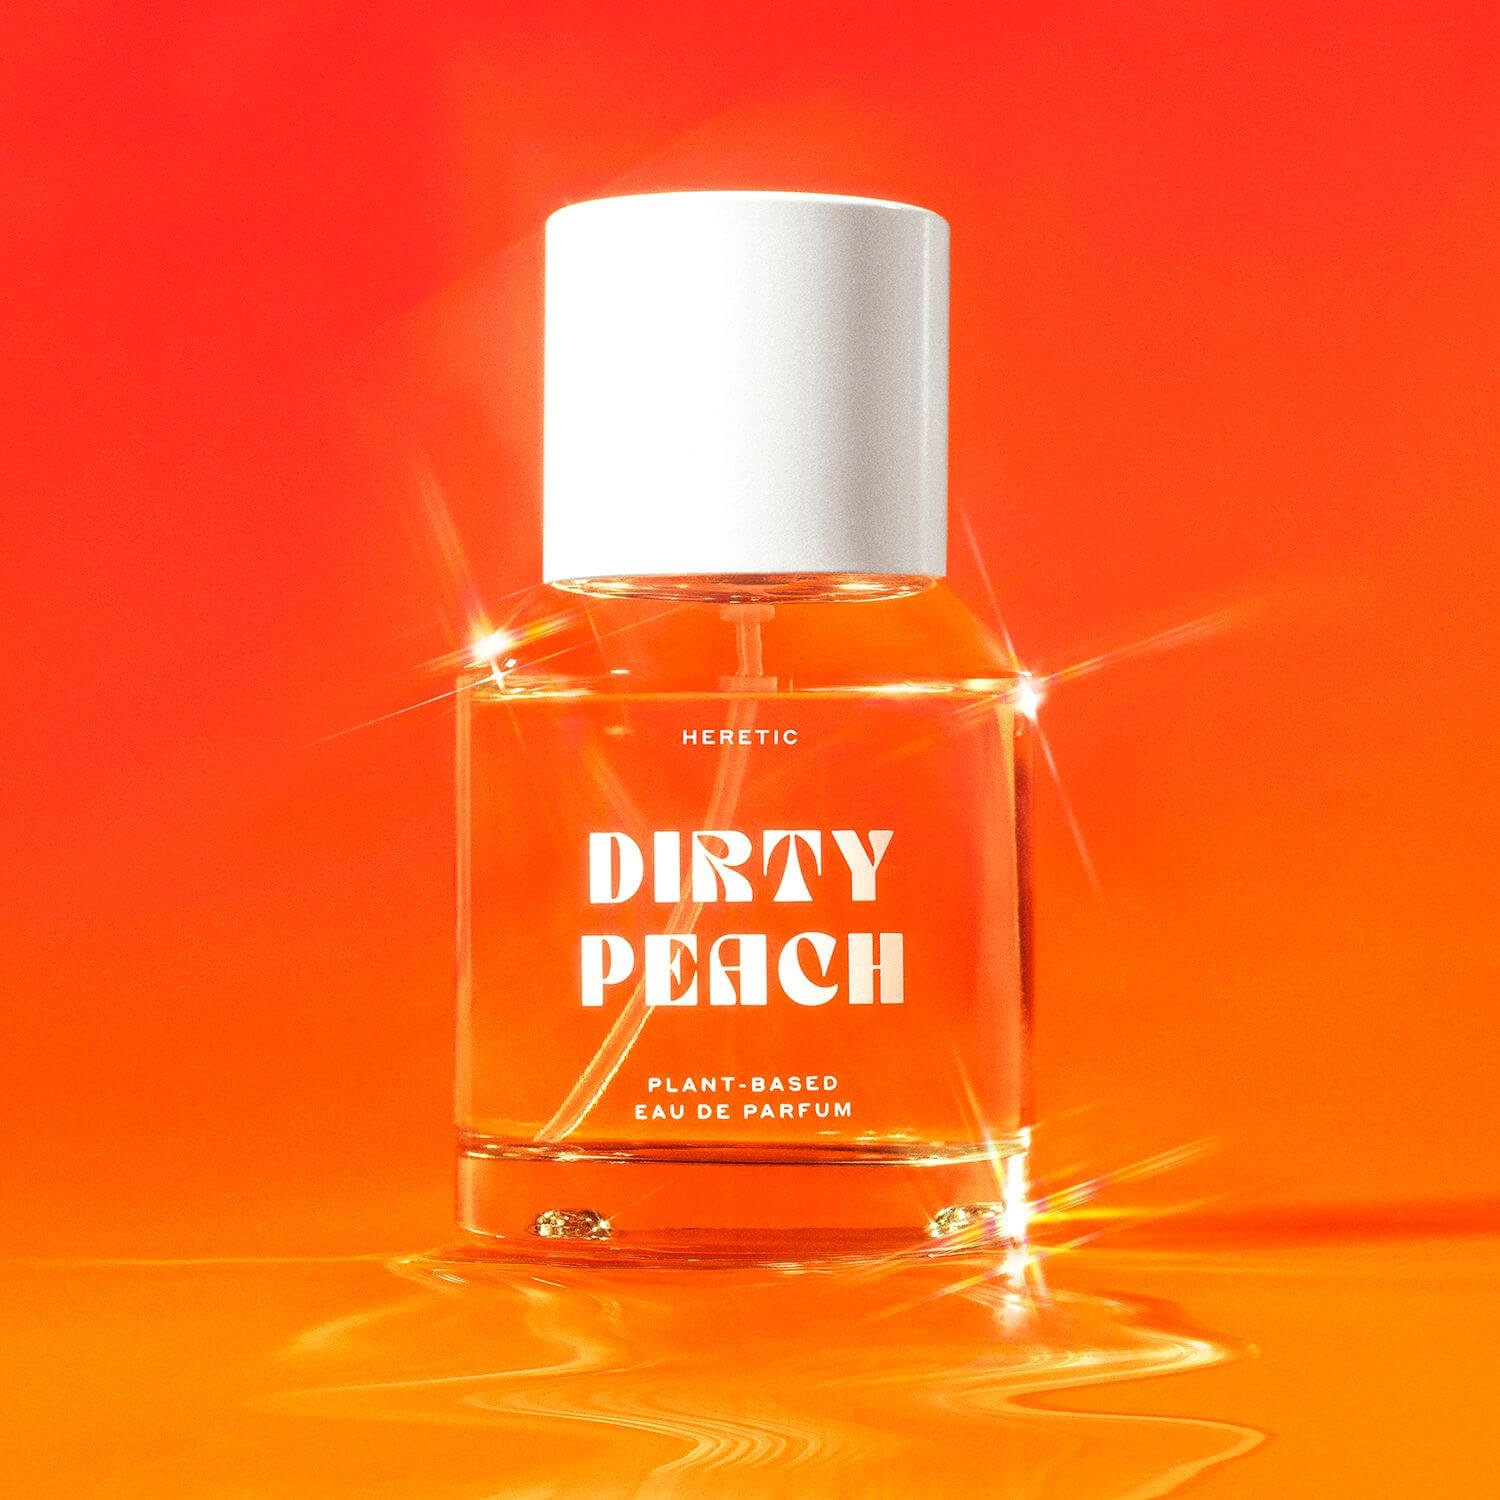 Heretic Parfum Dirty Peach for $16.95 per month | Scentbird